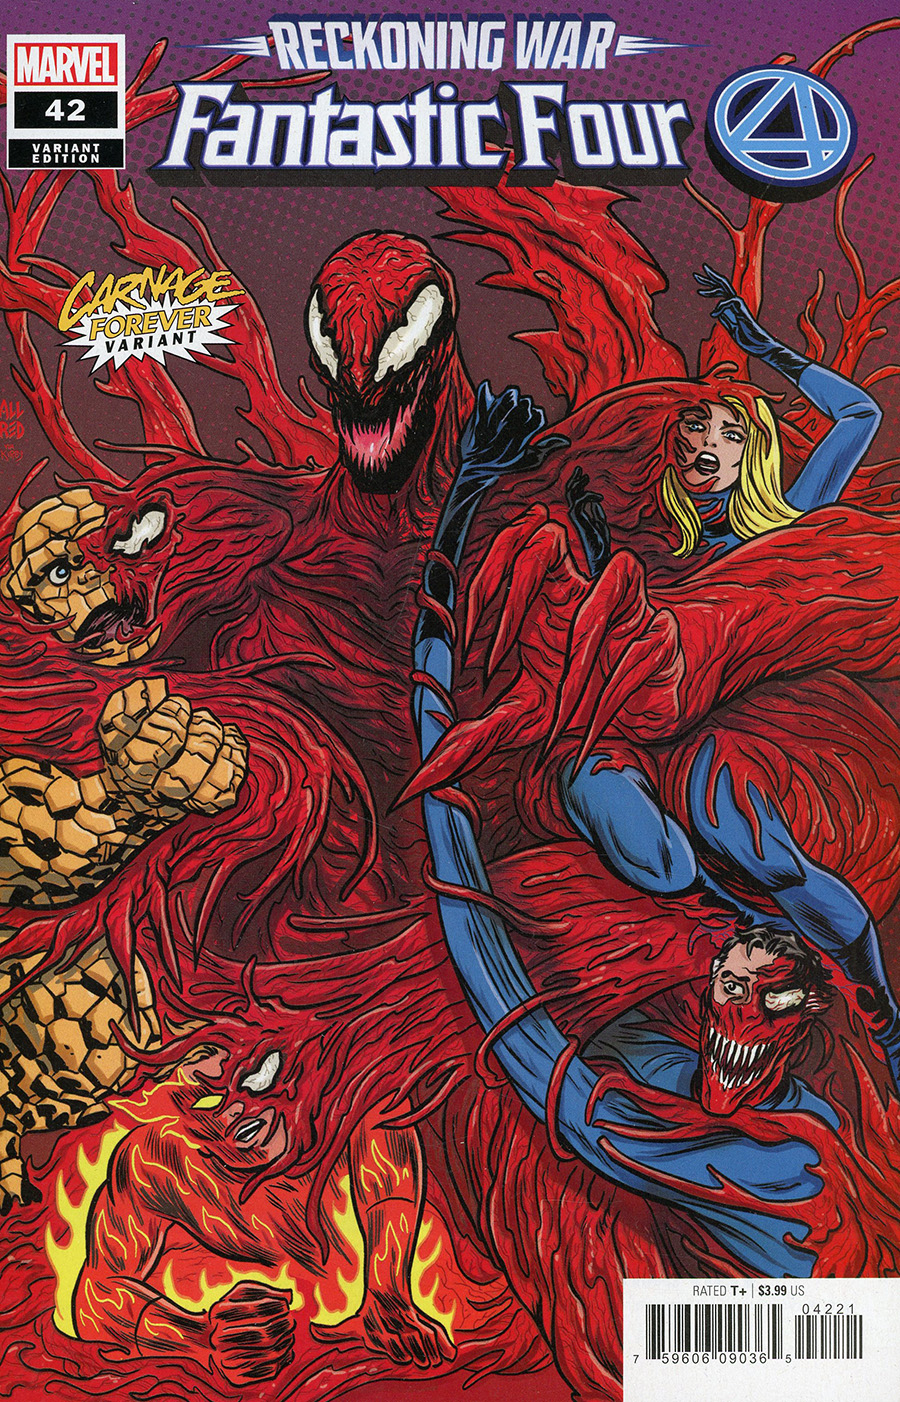 Fantastic Four Vol 6 #42 Cover B Variant Michael Allred Carnage Forever Cover (Reckoning War Tie-In)